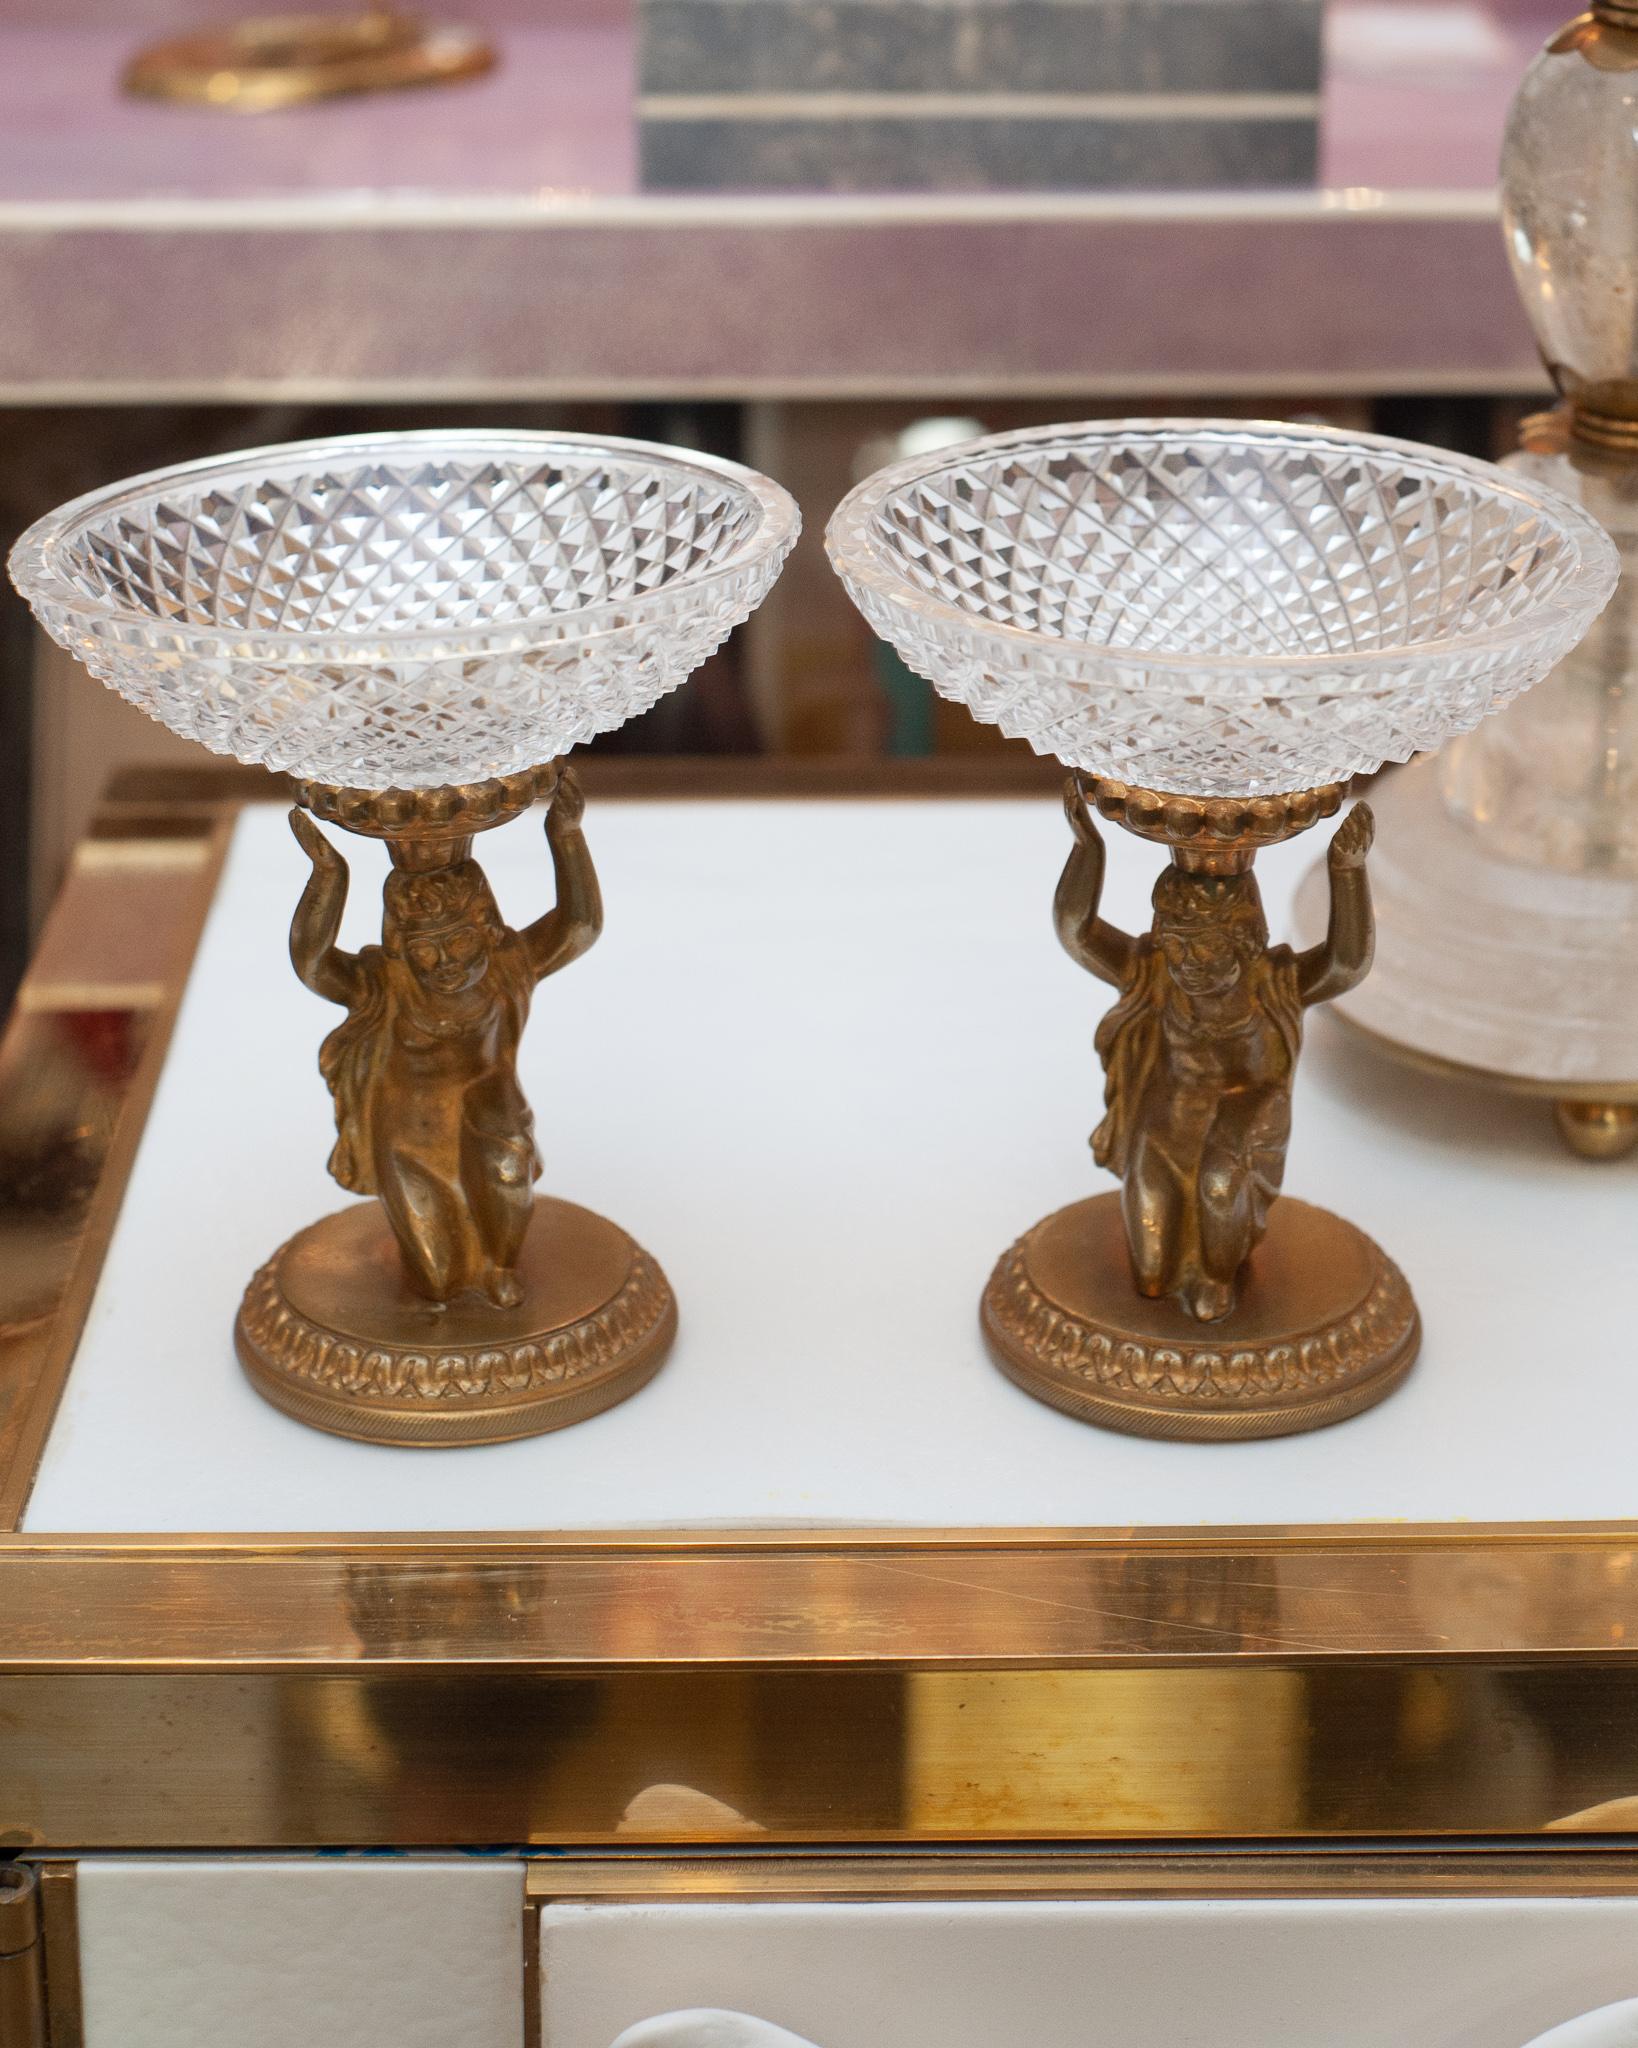 A beautiful pair of antique Baccarat bronze figural compotes with cut crystal bowls. Circa 1900, featuring cherub mounts on a bronze pedestal, these stunning pieces are stamped 